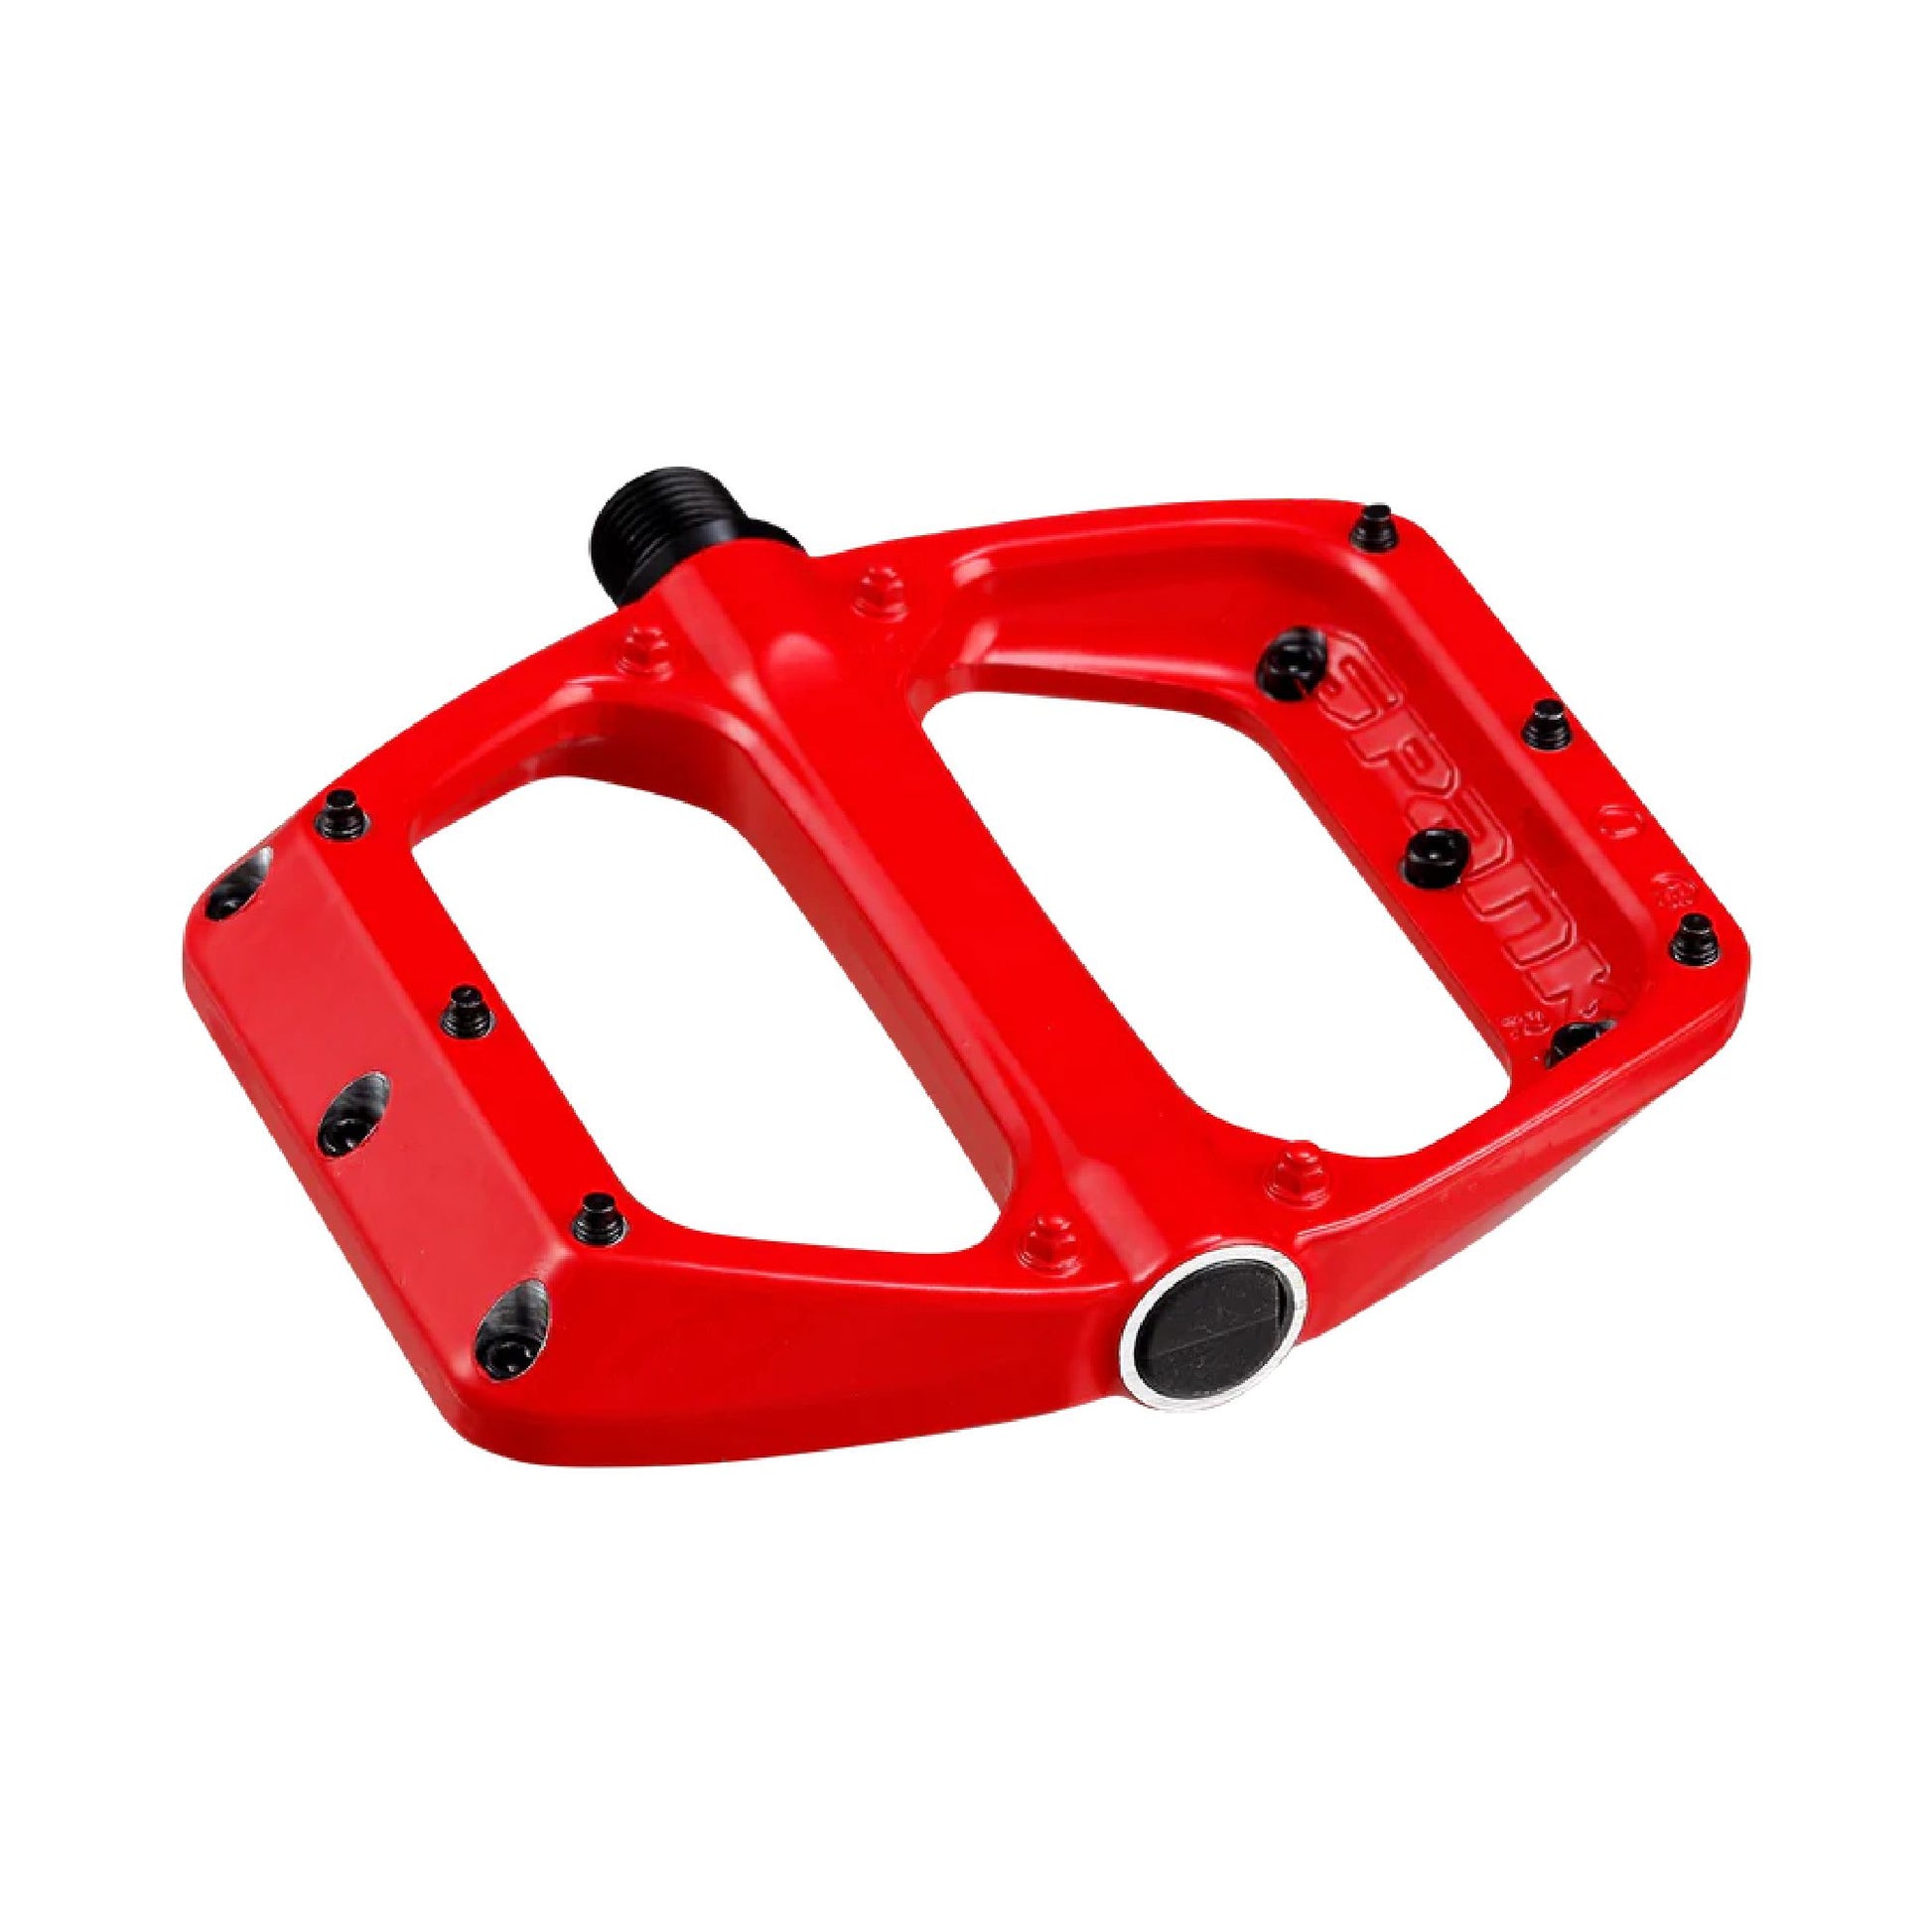 Spank Spoon DC Pedals Red 100x105mm Pedals